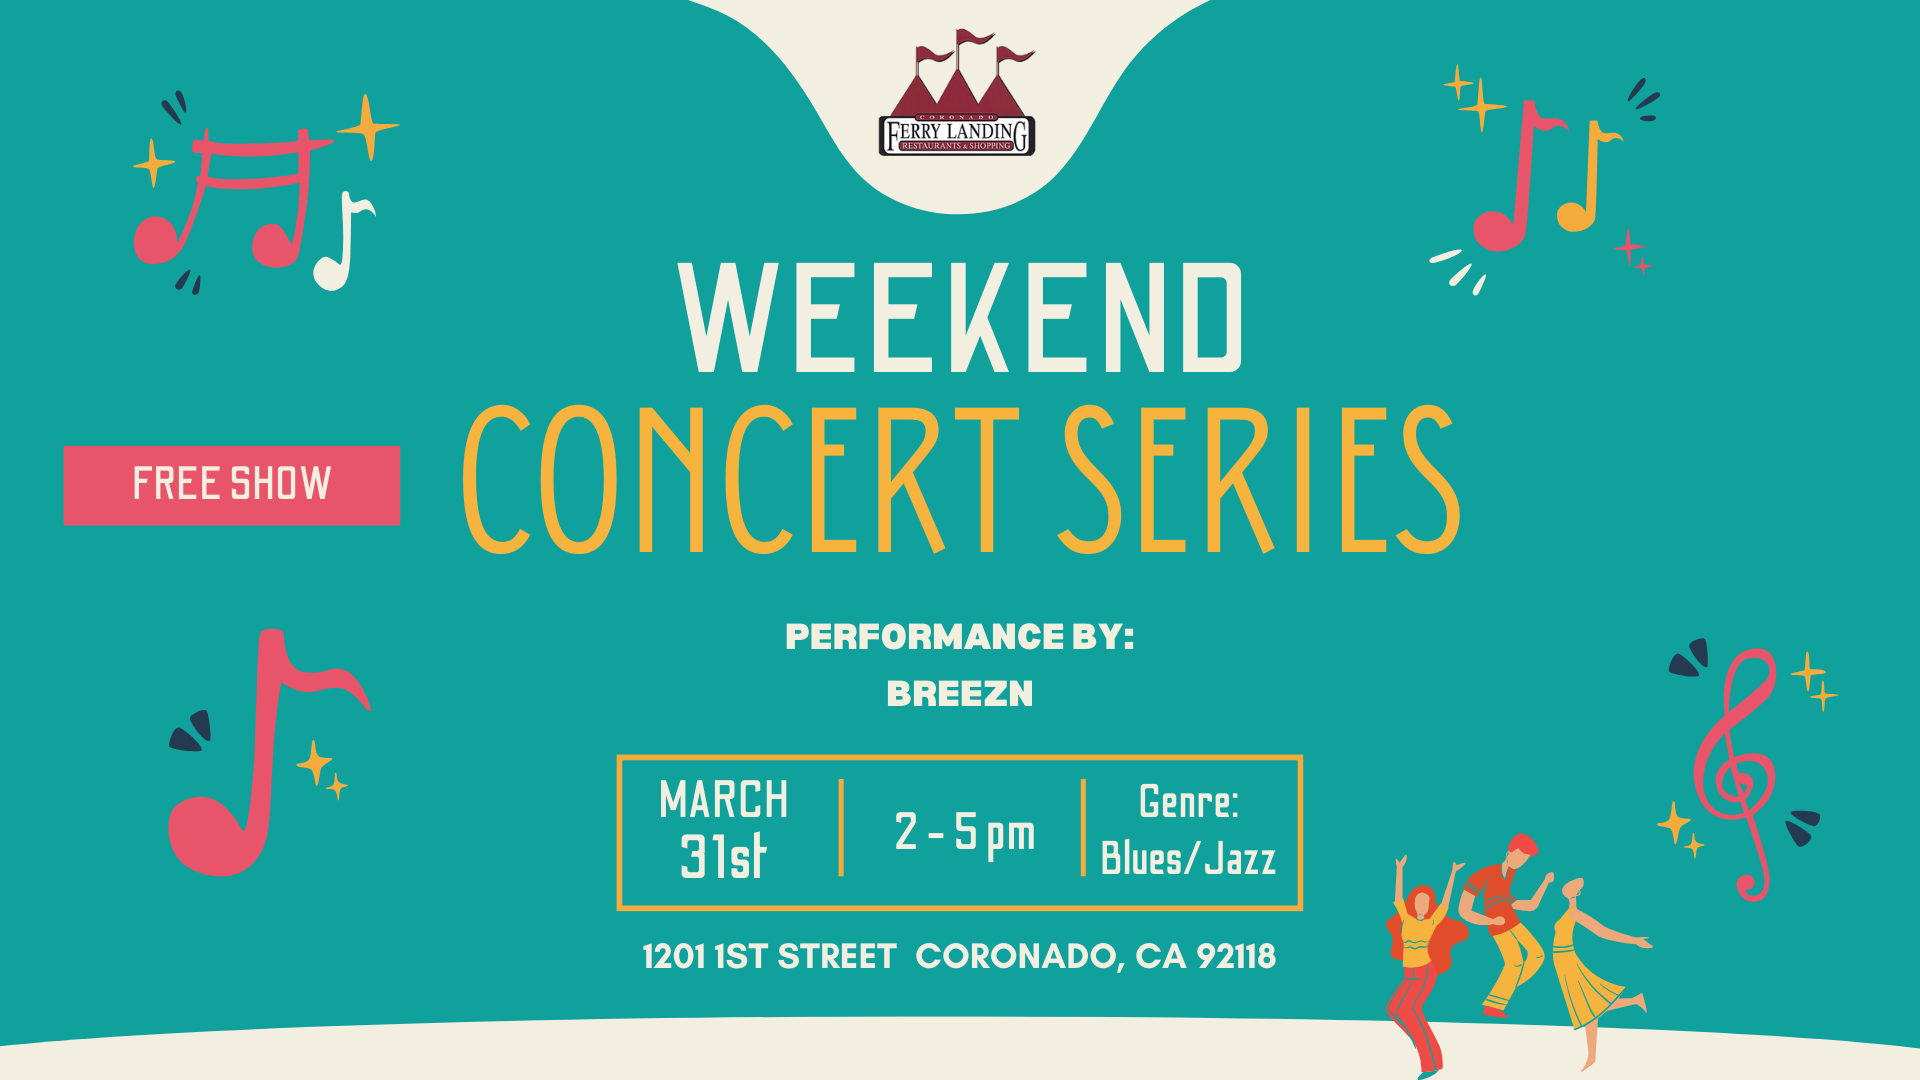 A cool teal blue poster advertises the 'Weekend Concert Series' at Ferry Landing with BREEZN performing on March 31st from 2-5 pm. The music genre is Blues/Jazz. The address is listed at the bottom as 1201 1st Street Coronado, CA 92118, and the event is highlighted as a 'FREE SHOW' in a red banner. The poster is decorated with musical notes, colorful confetti, and silhouettes of people dancing, suggesting a lively and entertaining event.